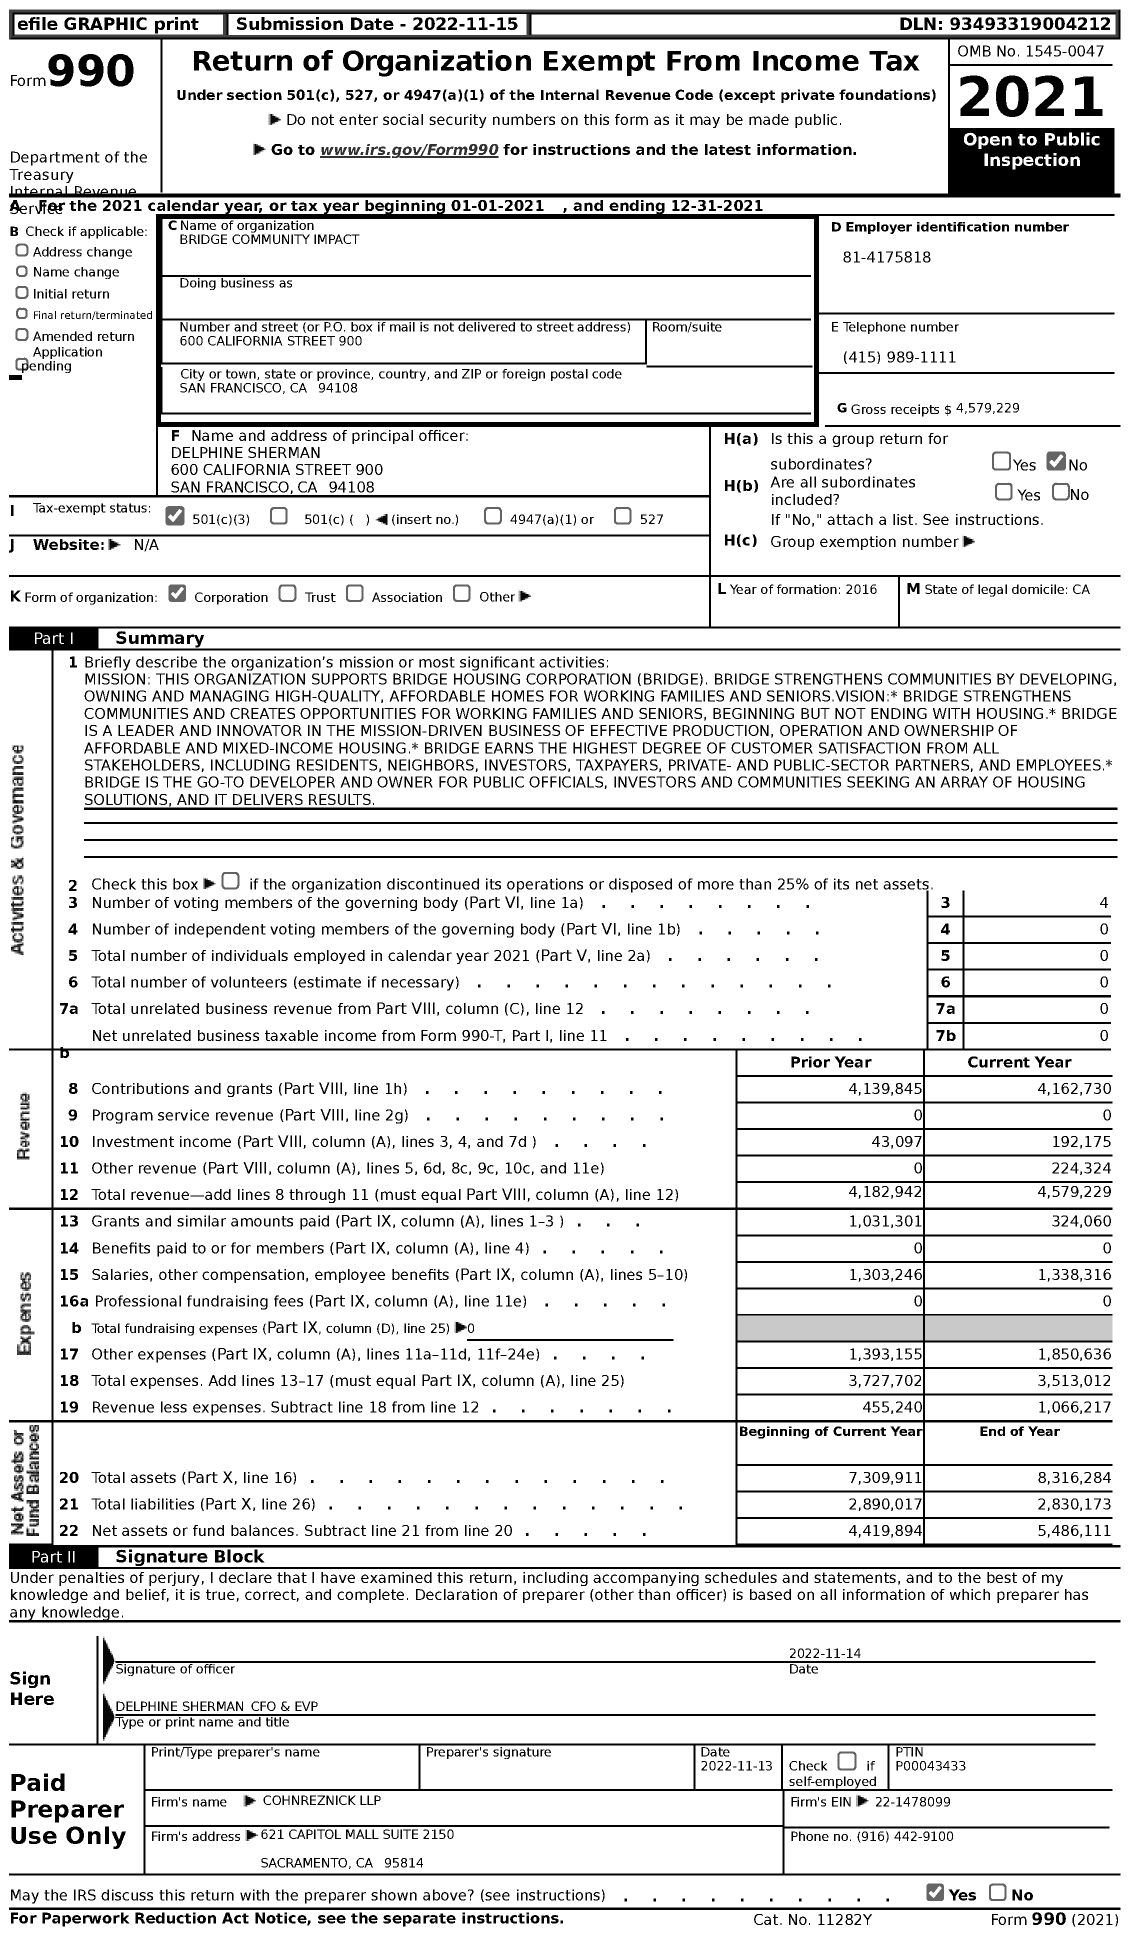 Image of first page of 2021 Form 990 for Bridge Community Impact (BRIC)